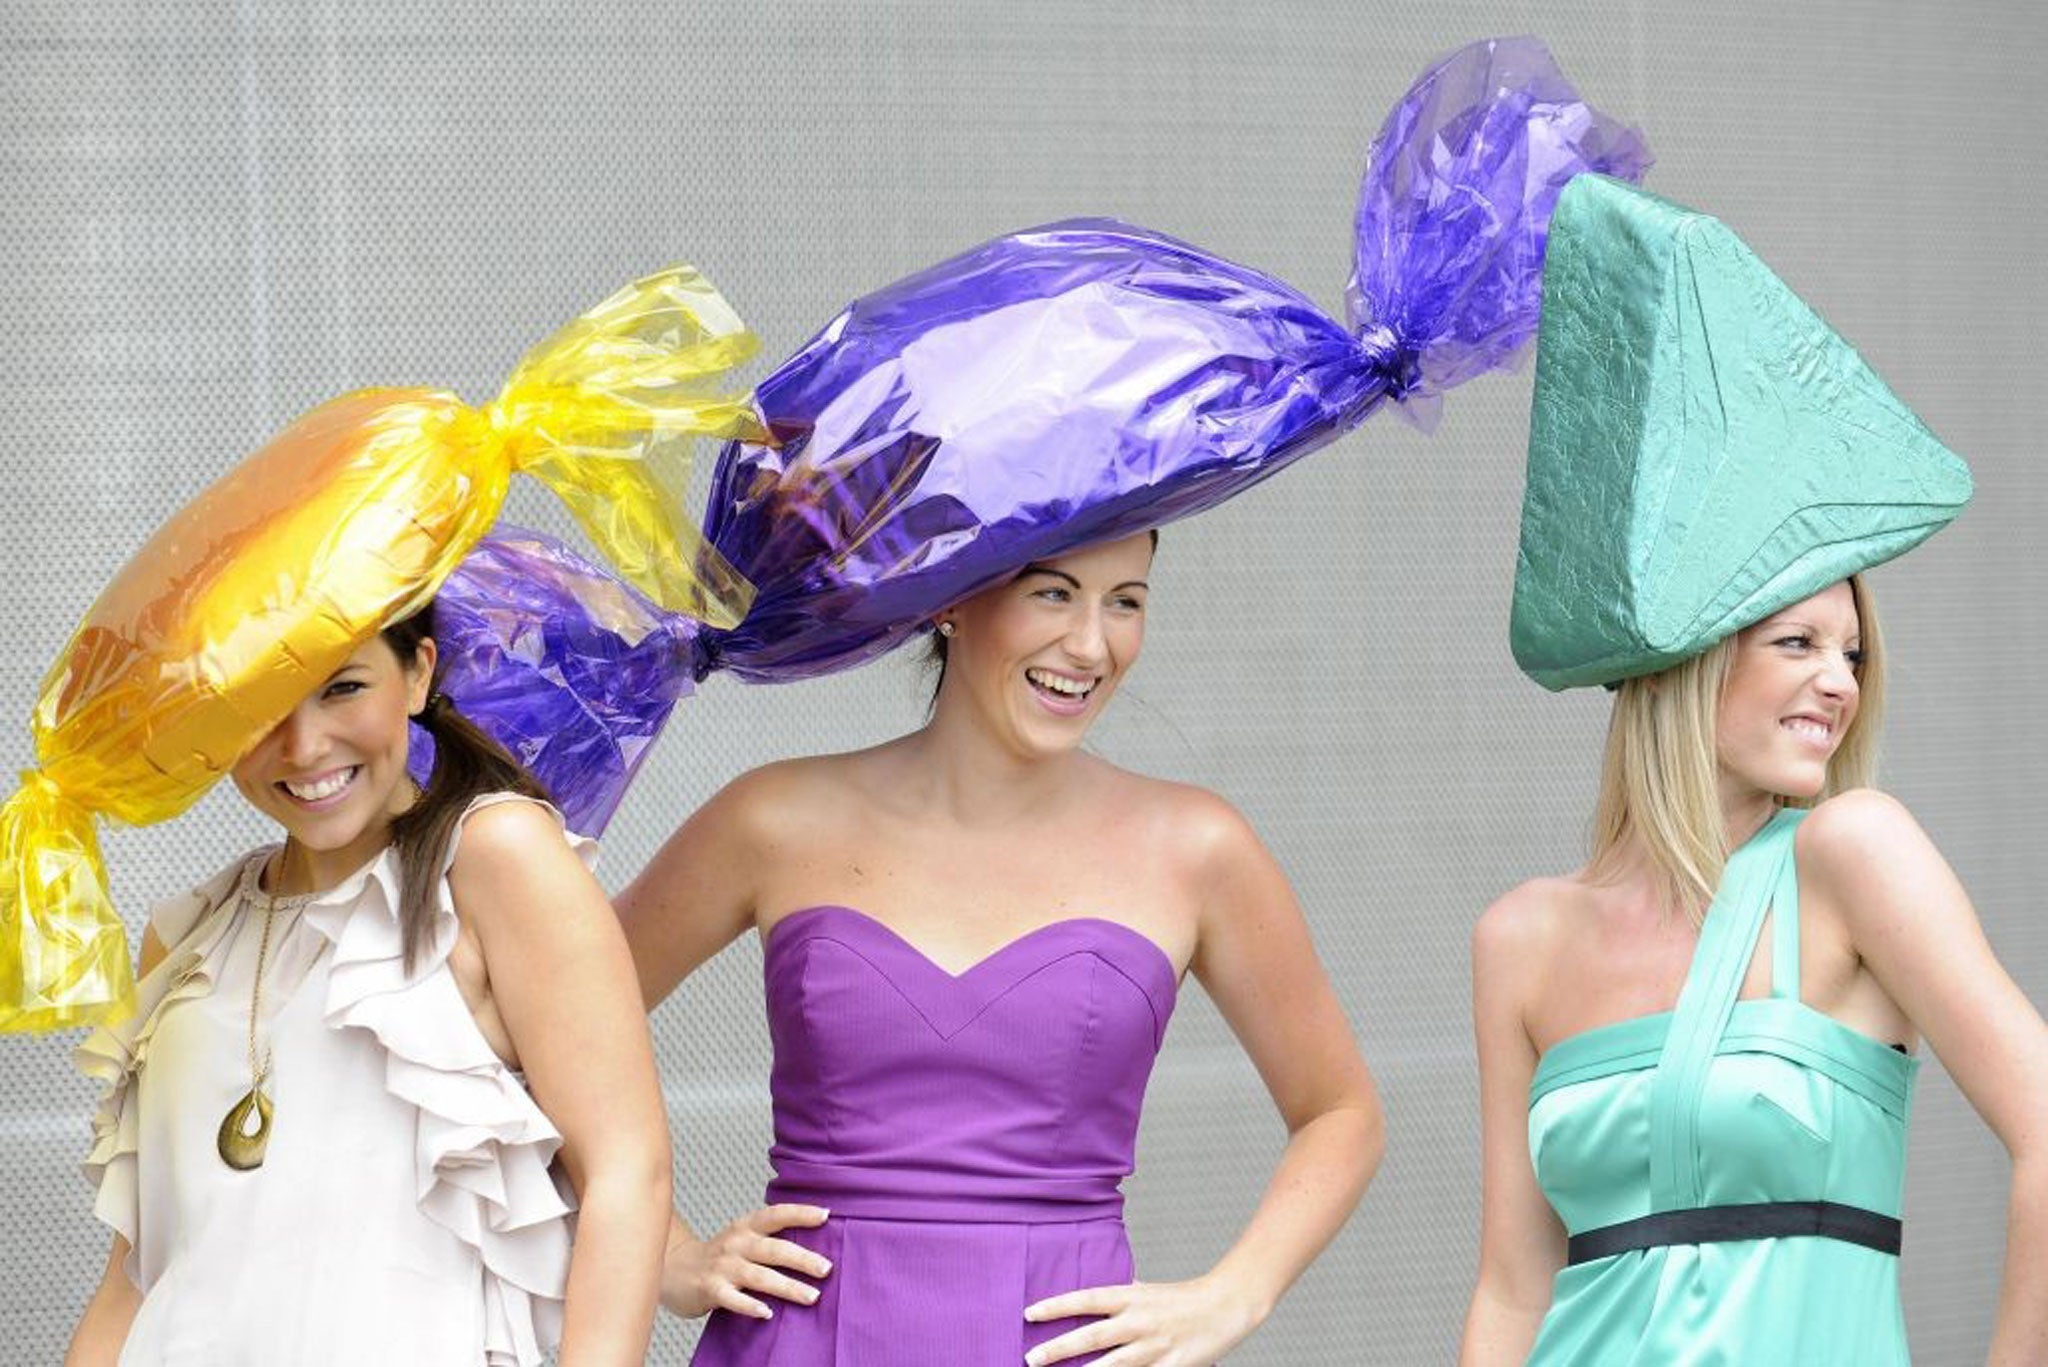 Quality Street has been a fashion theme at Royal Ascot